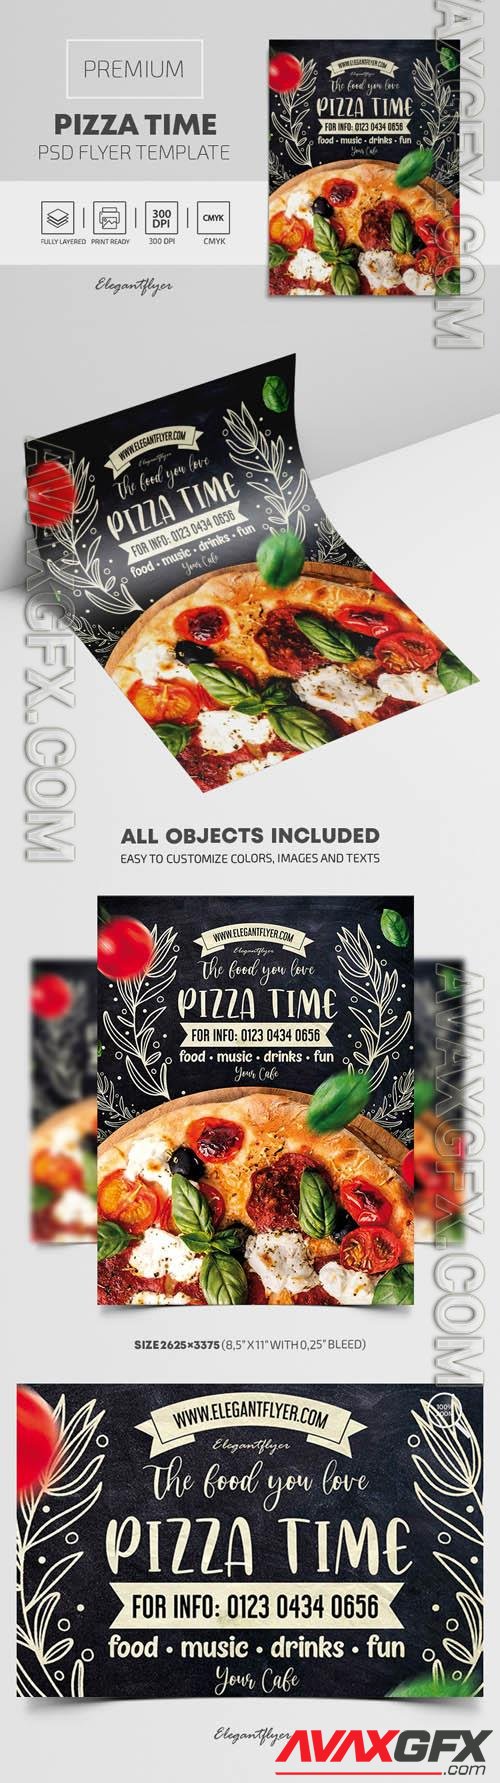 Pizza Time Premium PSD Flyer Template